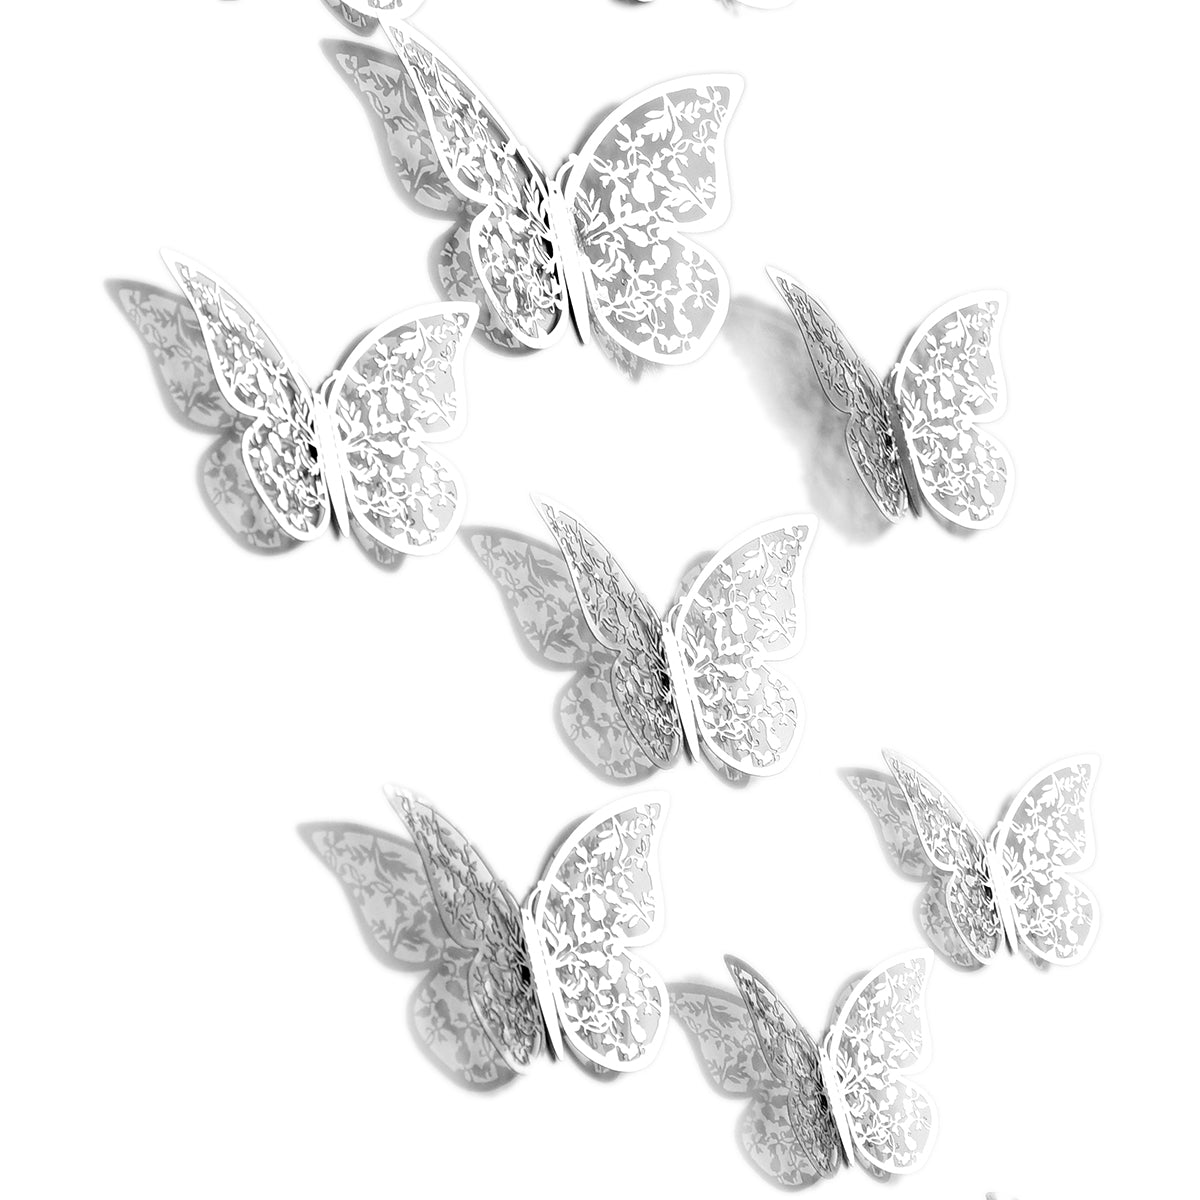 7 pieces silver butterflies with white background